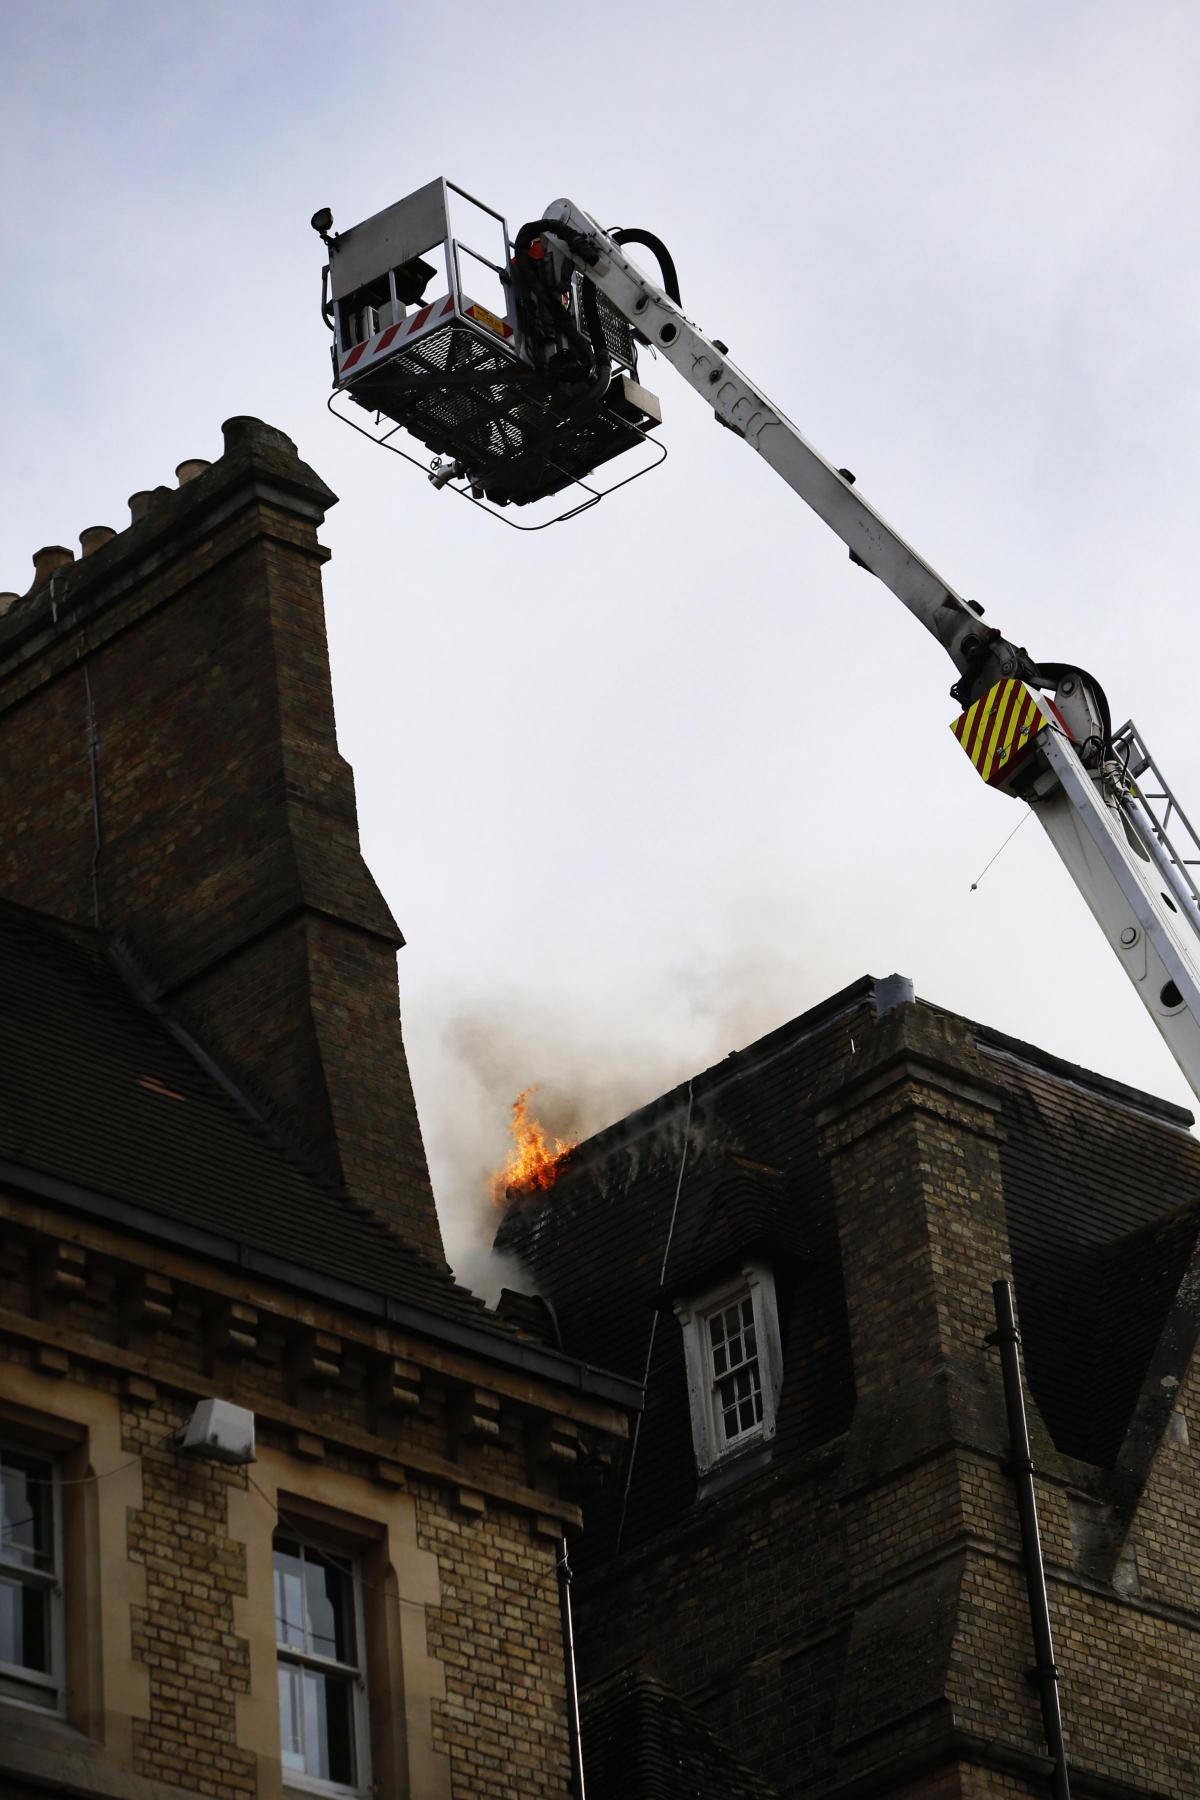 A fire broke out at the Randolph Hotel on Friday, April 17, causing significant damage to the iconic Grade II-listed building